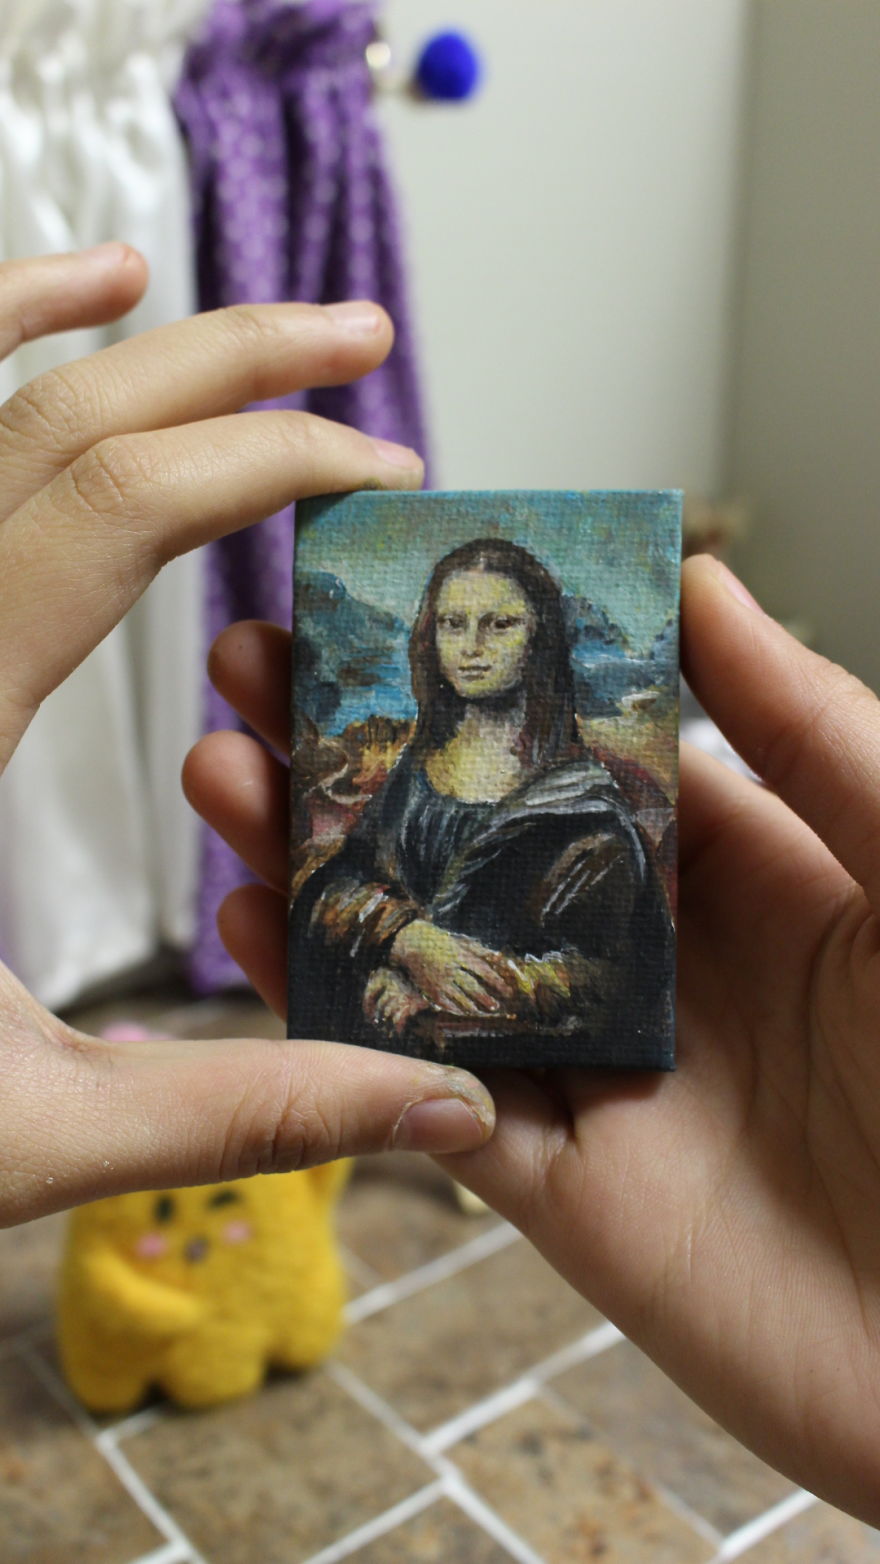 Did I Paint The World's Smallest Painting Of Mona Lisa?